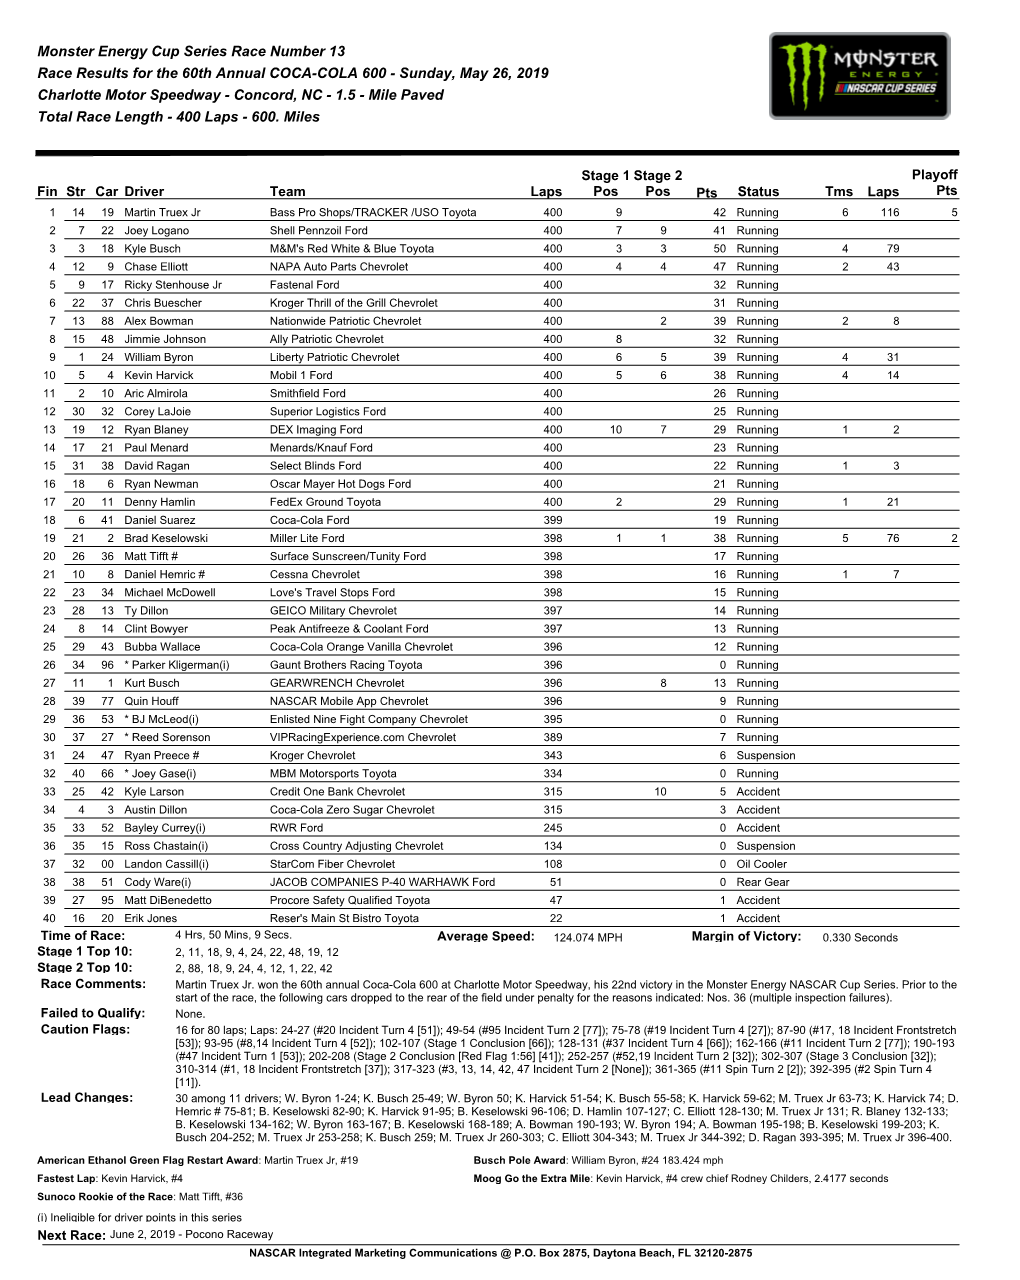 Race Results for the 60Th Annual COCA-COLA 600 - Sunday, May 26, 2019 Charlotte Motor Speedway - Concord, NC - 1.5 - Mile Paved Total Race Length - 400 Laps - 600